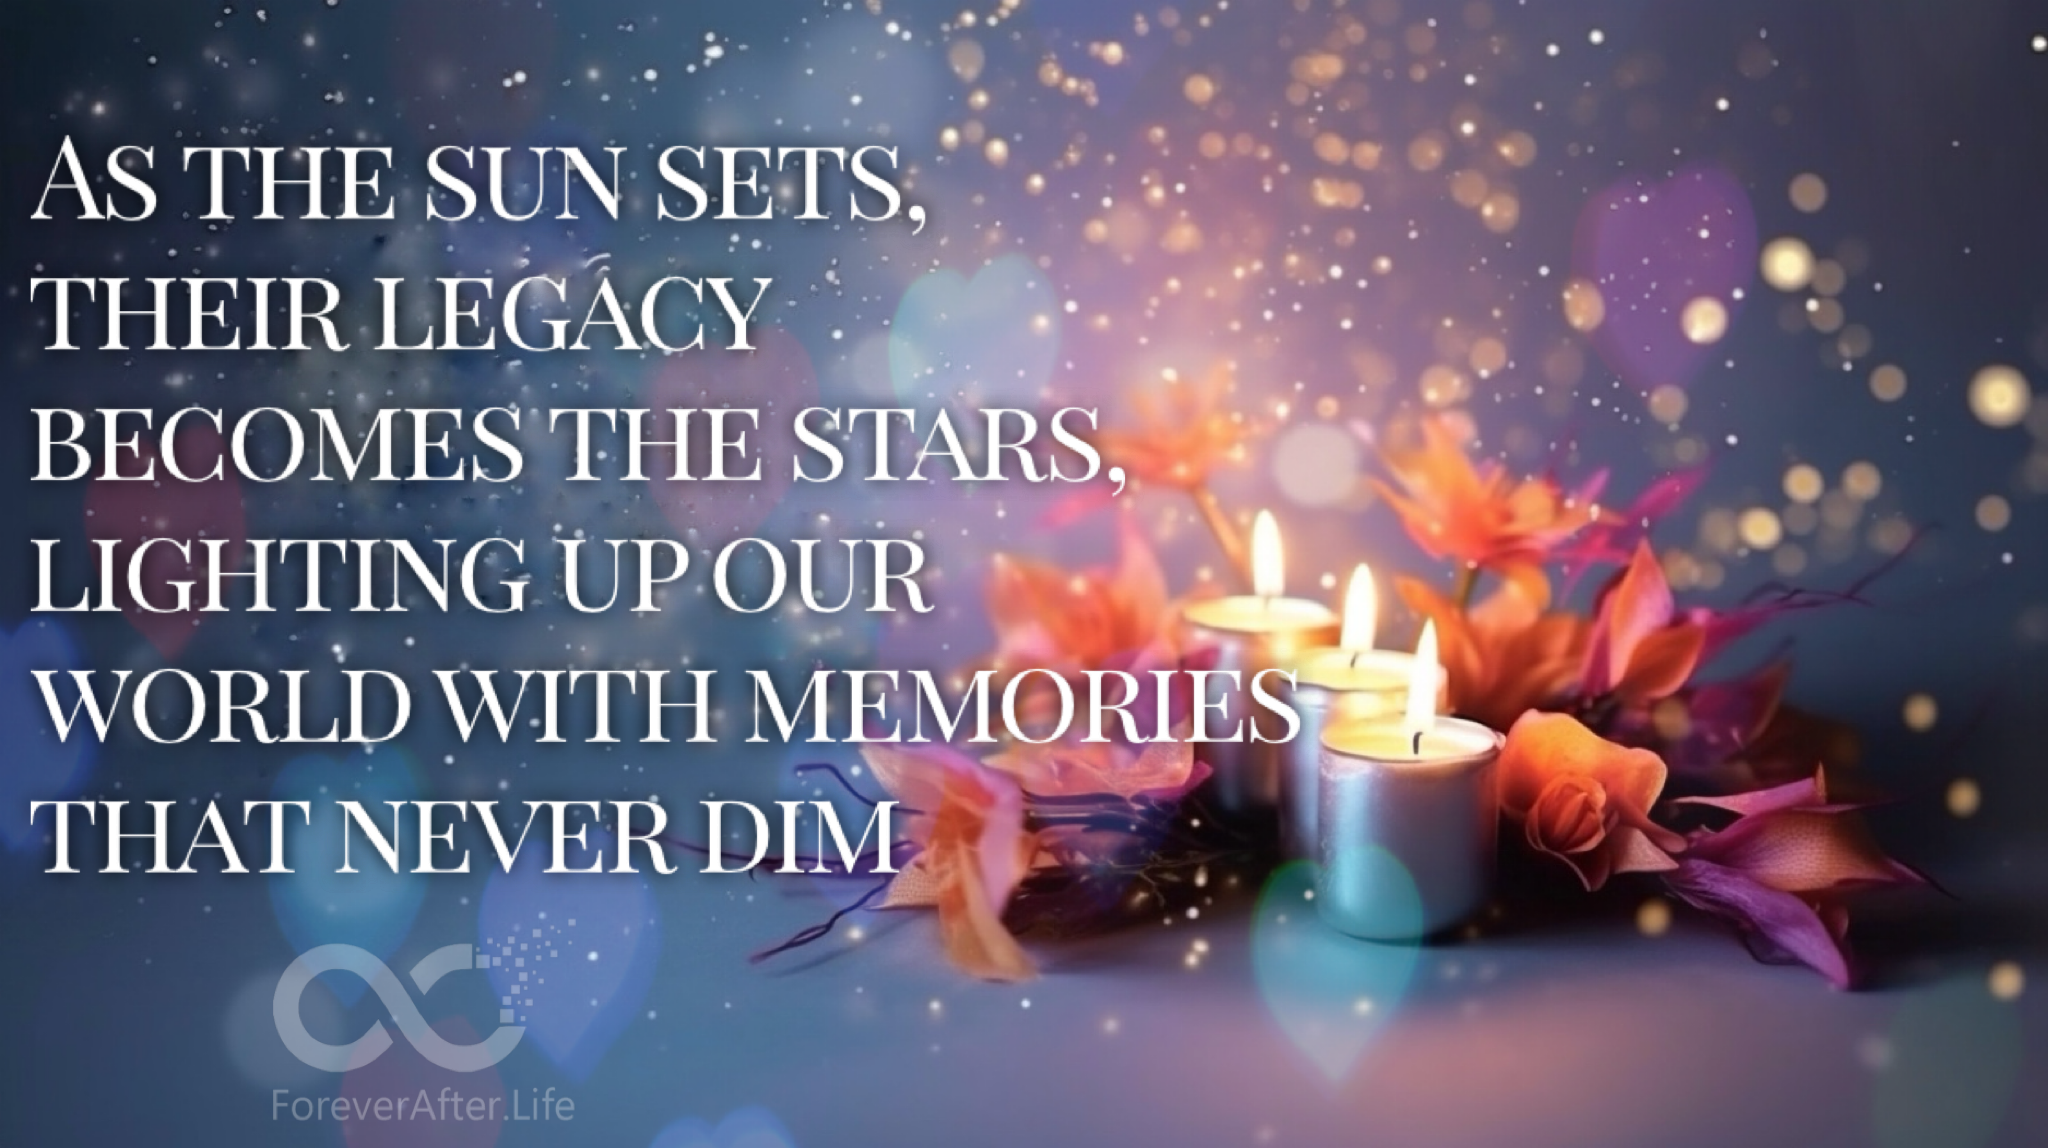 As the sun sets, their legacy becomes the stars, lighting up our world with memories that never dim